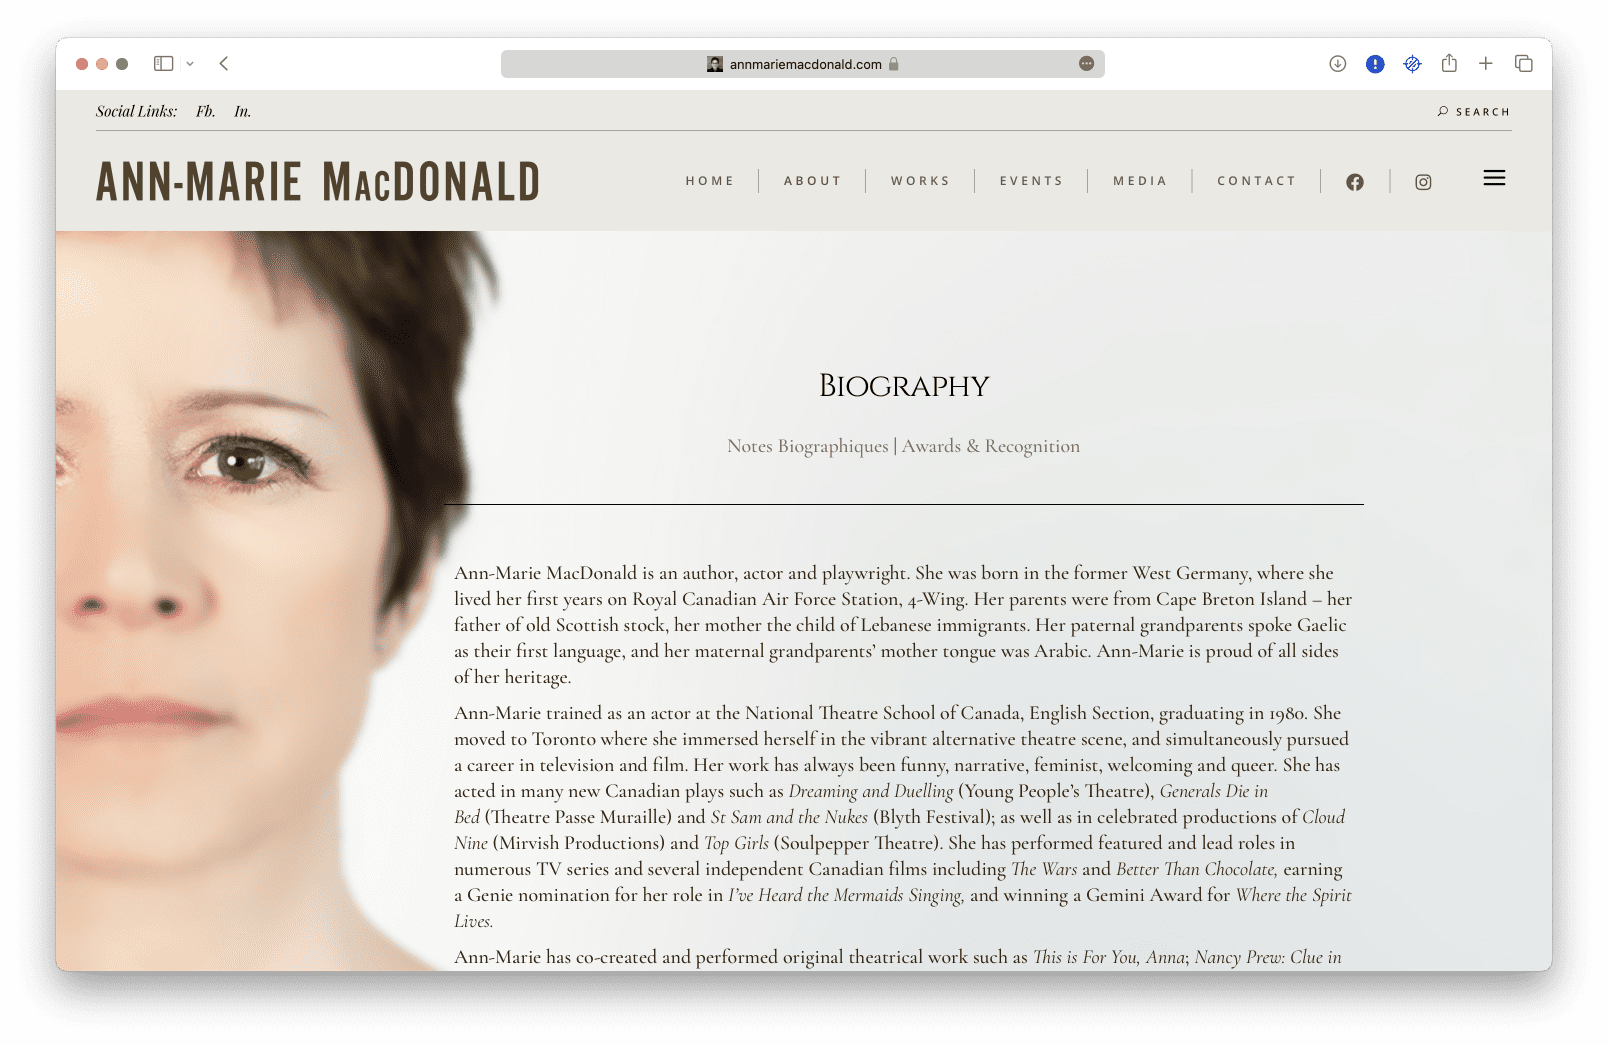 Website featuring Ann-Marie MacDonald with her face.